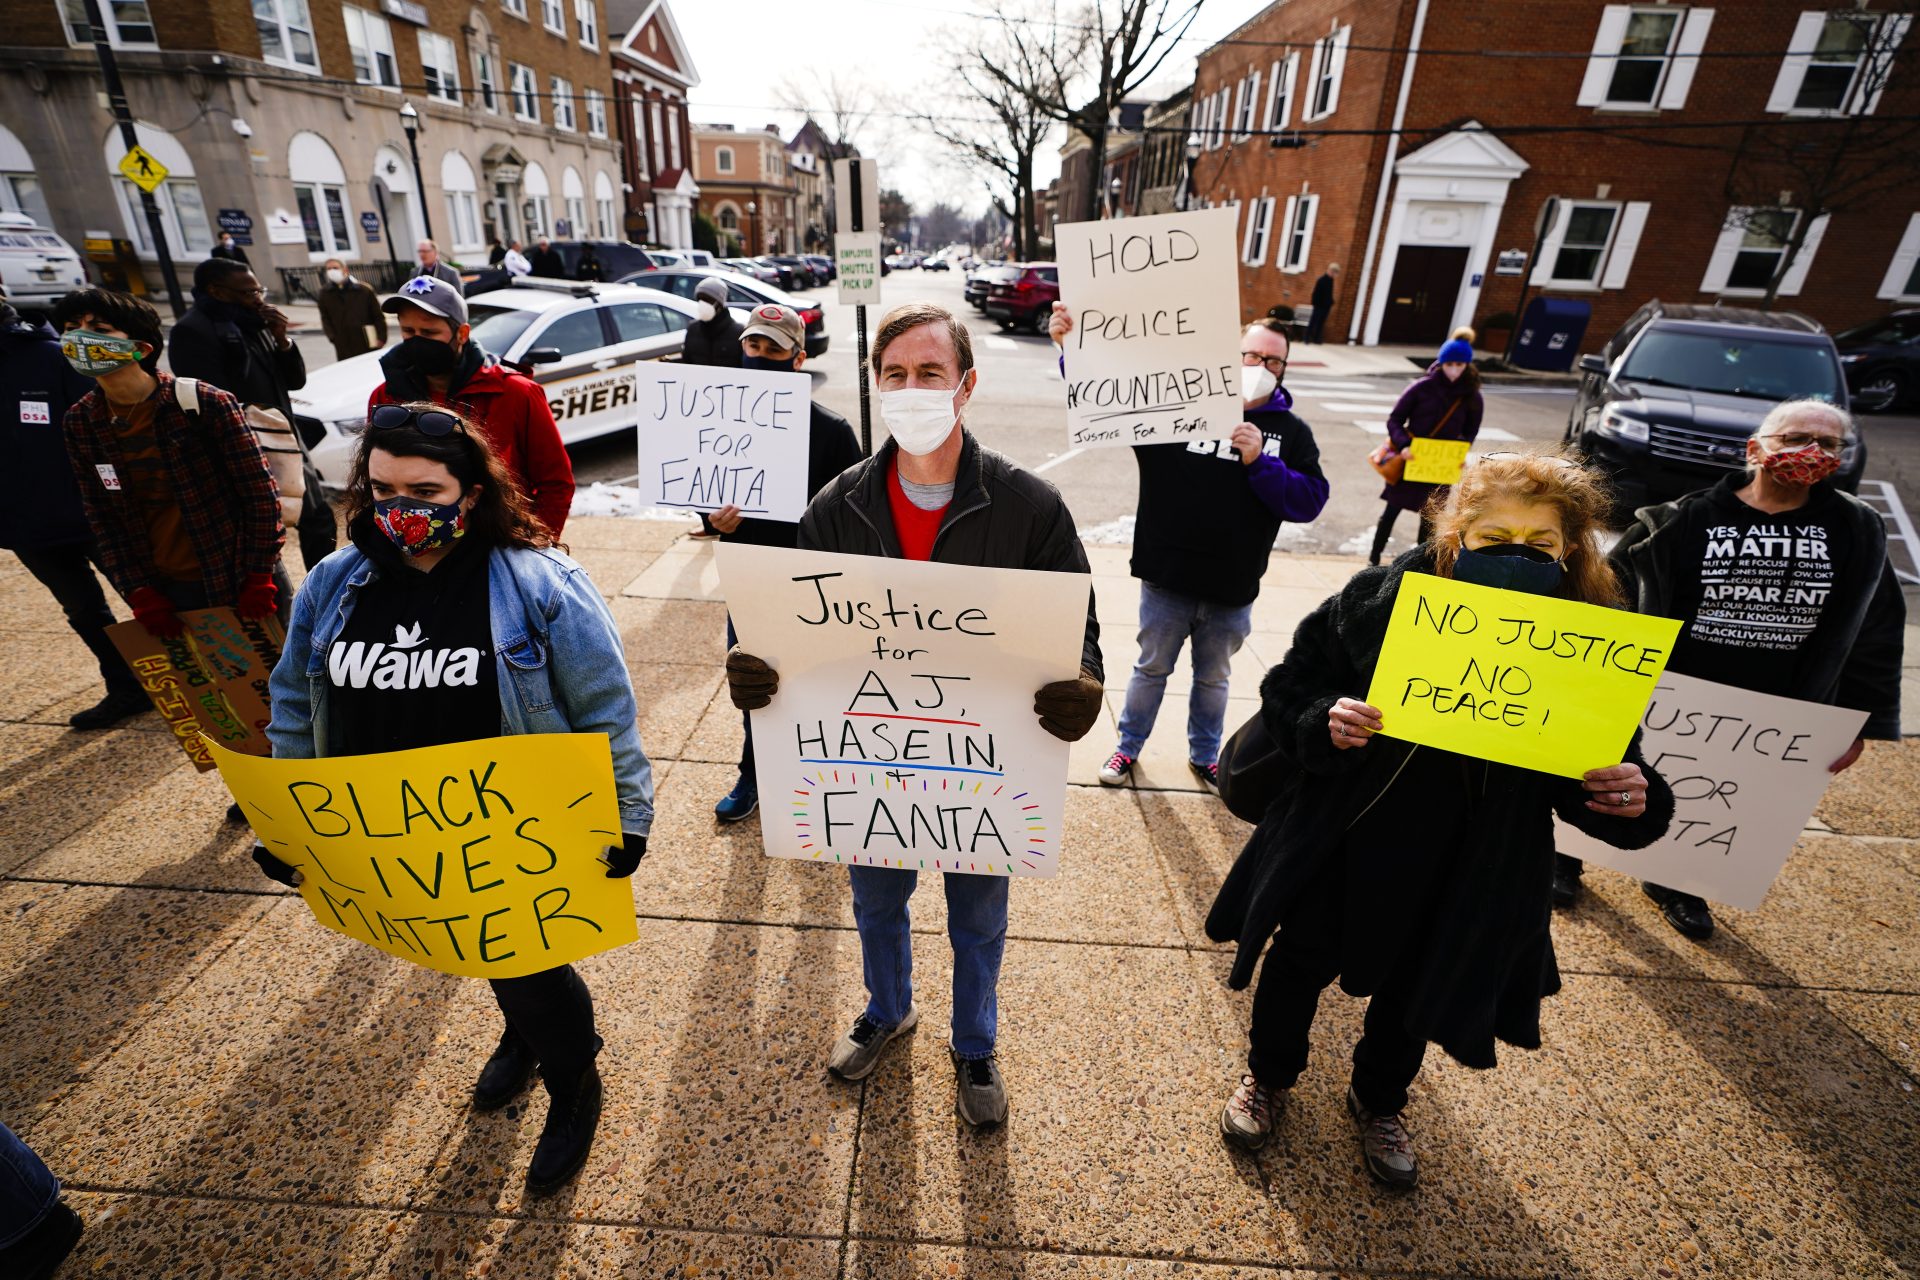 Protesters demonstrate calling for police accountability in the death of 8-year-old Fanta Bility who was shot outside a football game, at the Delaware County Courthouse in Media, Pa., Thursday, Jan. 13, 2022.